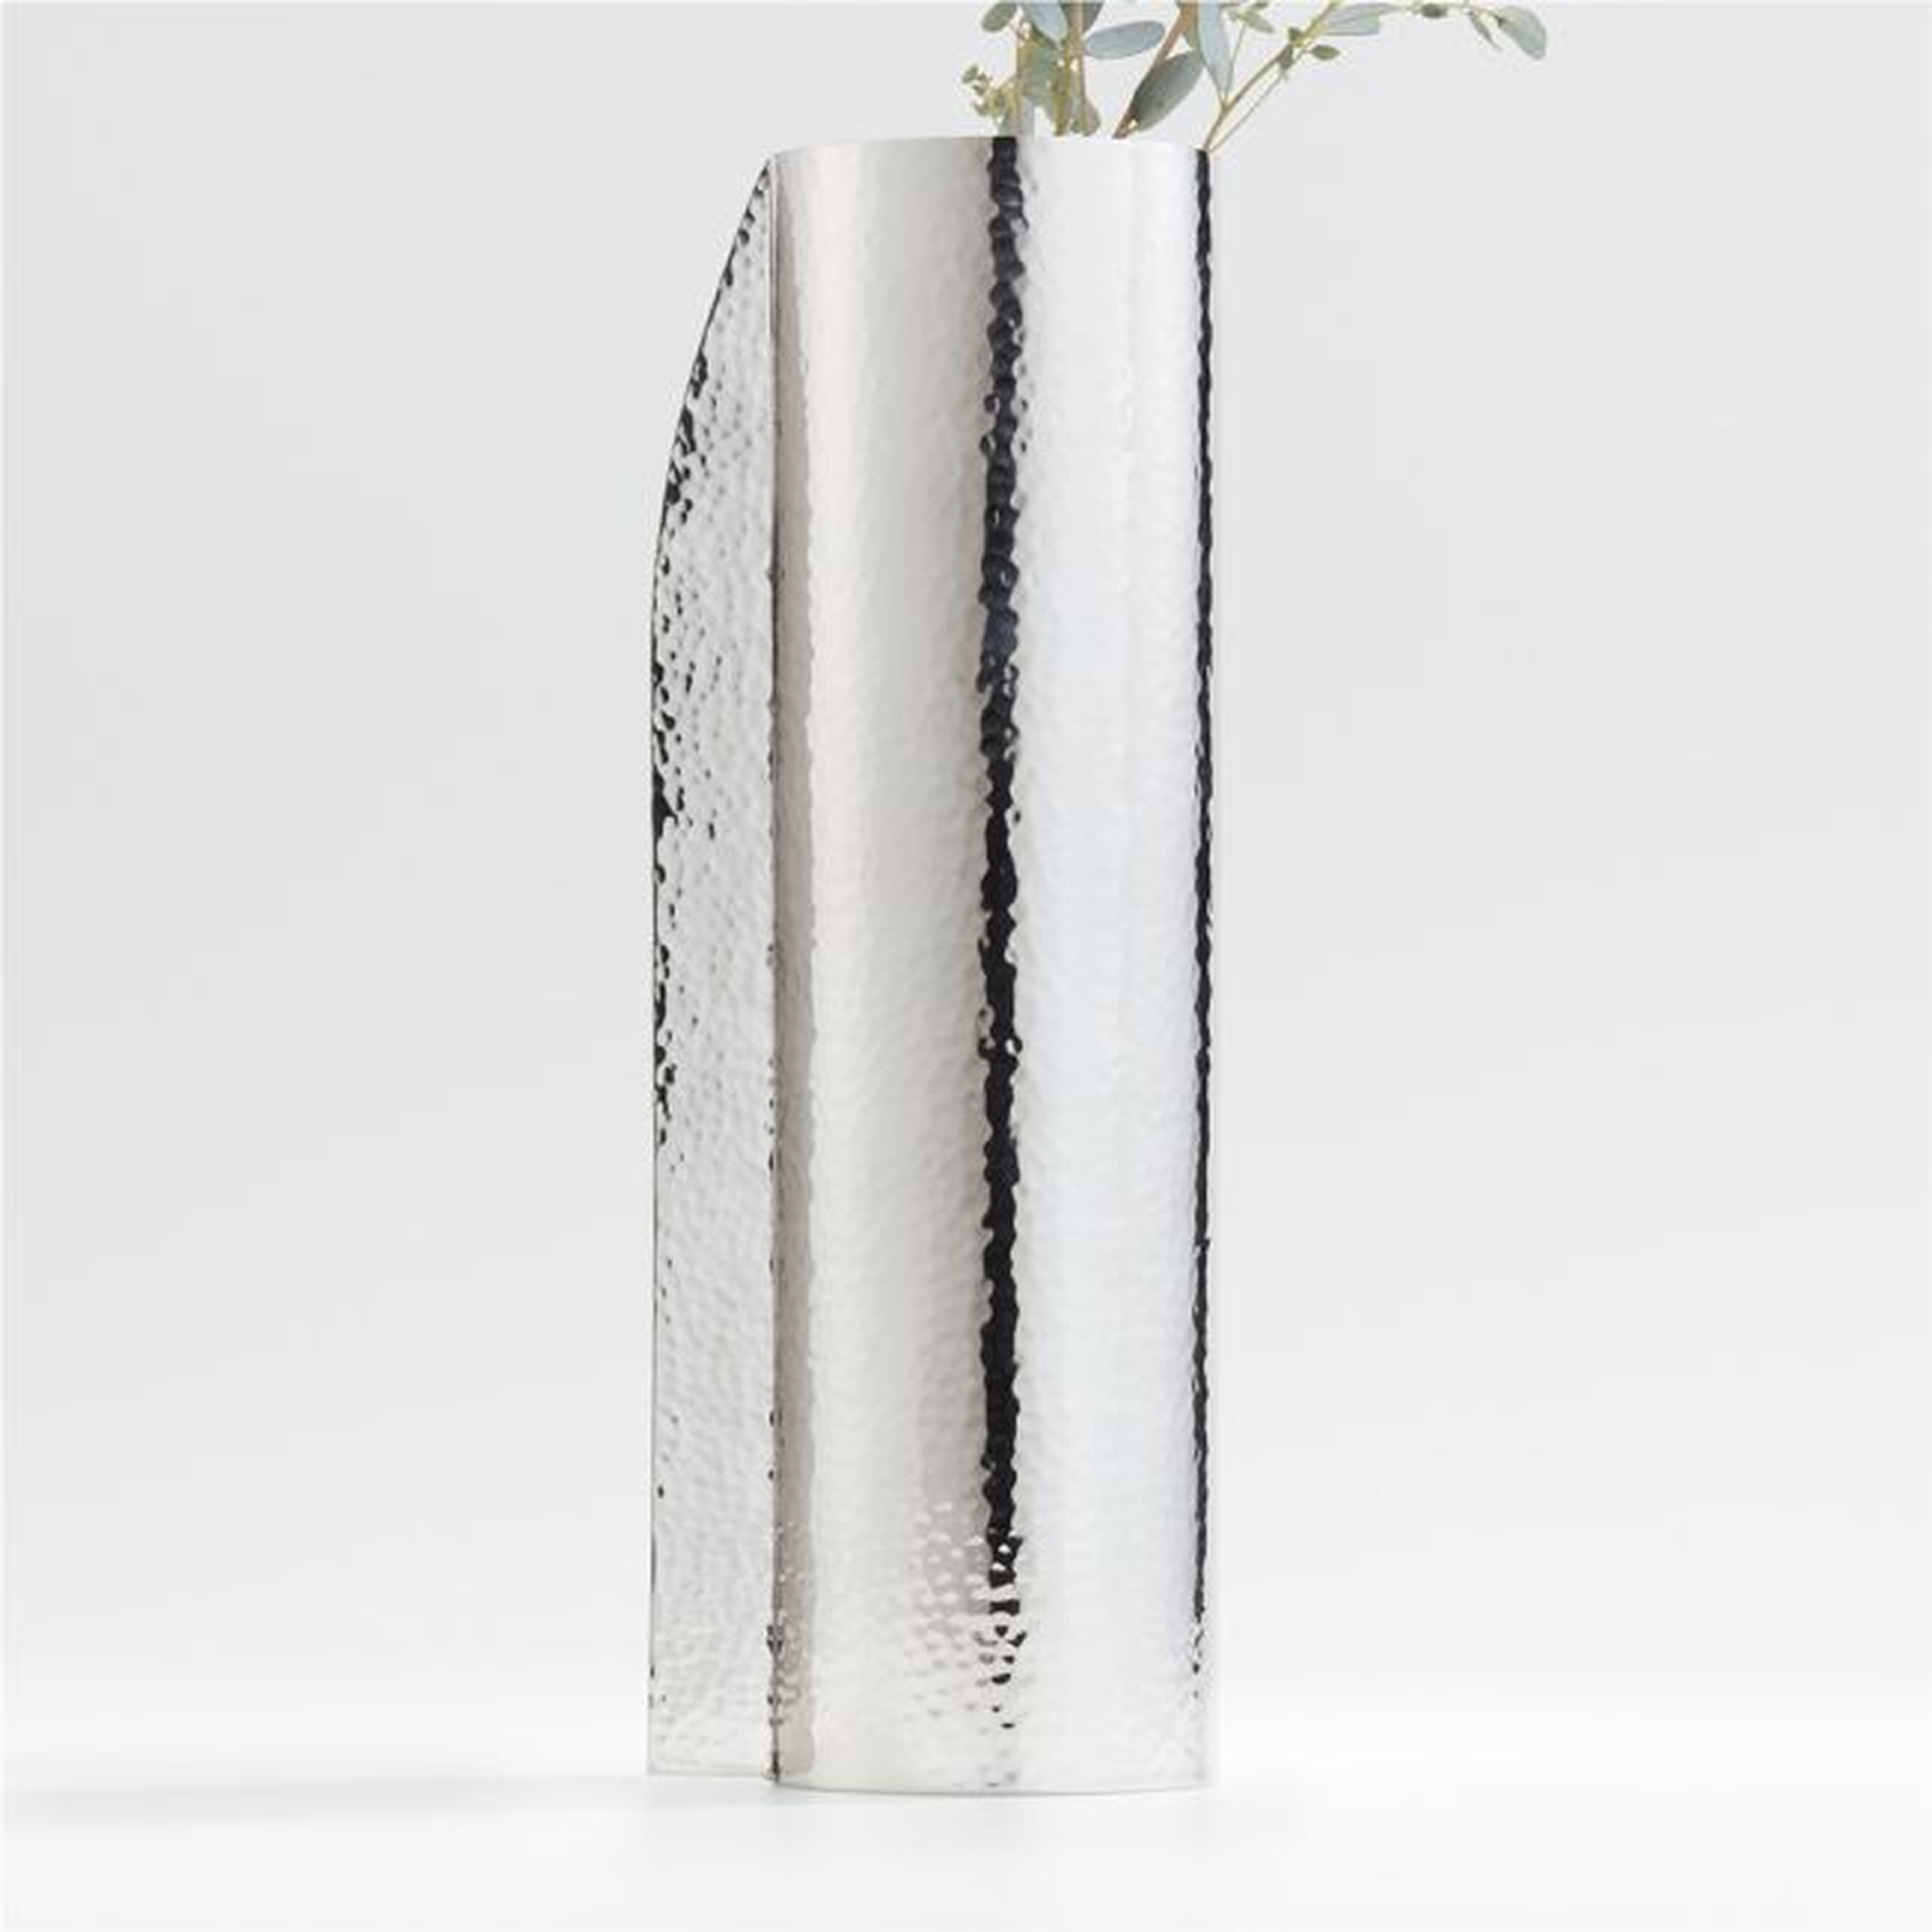 Coso Large Silver Metal Vase - Crate and Barrel